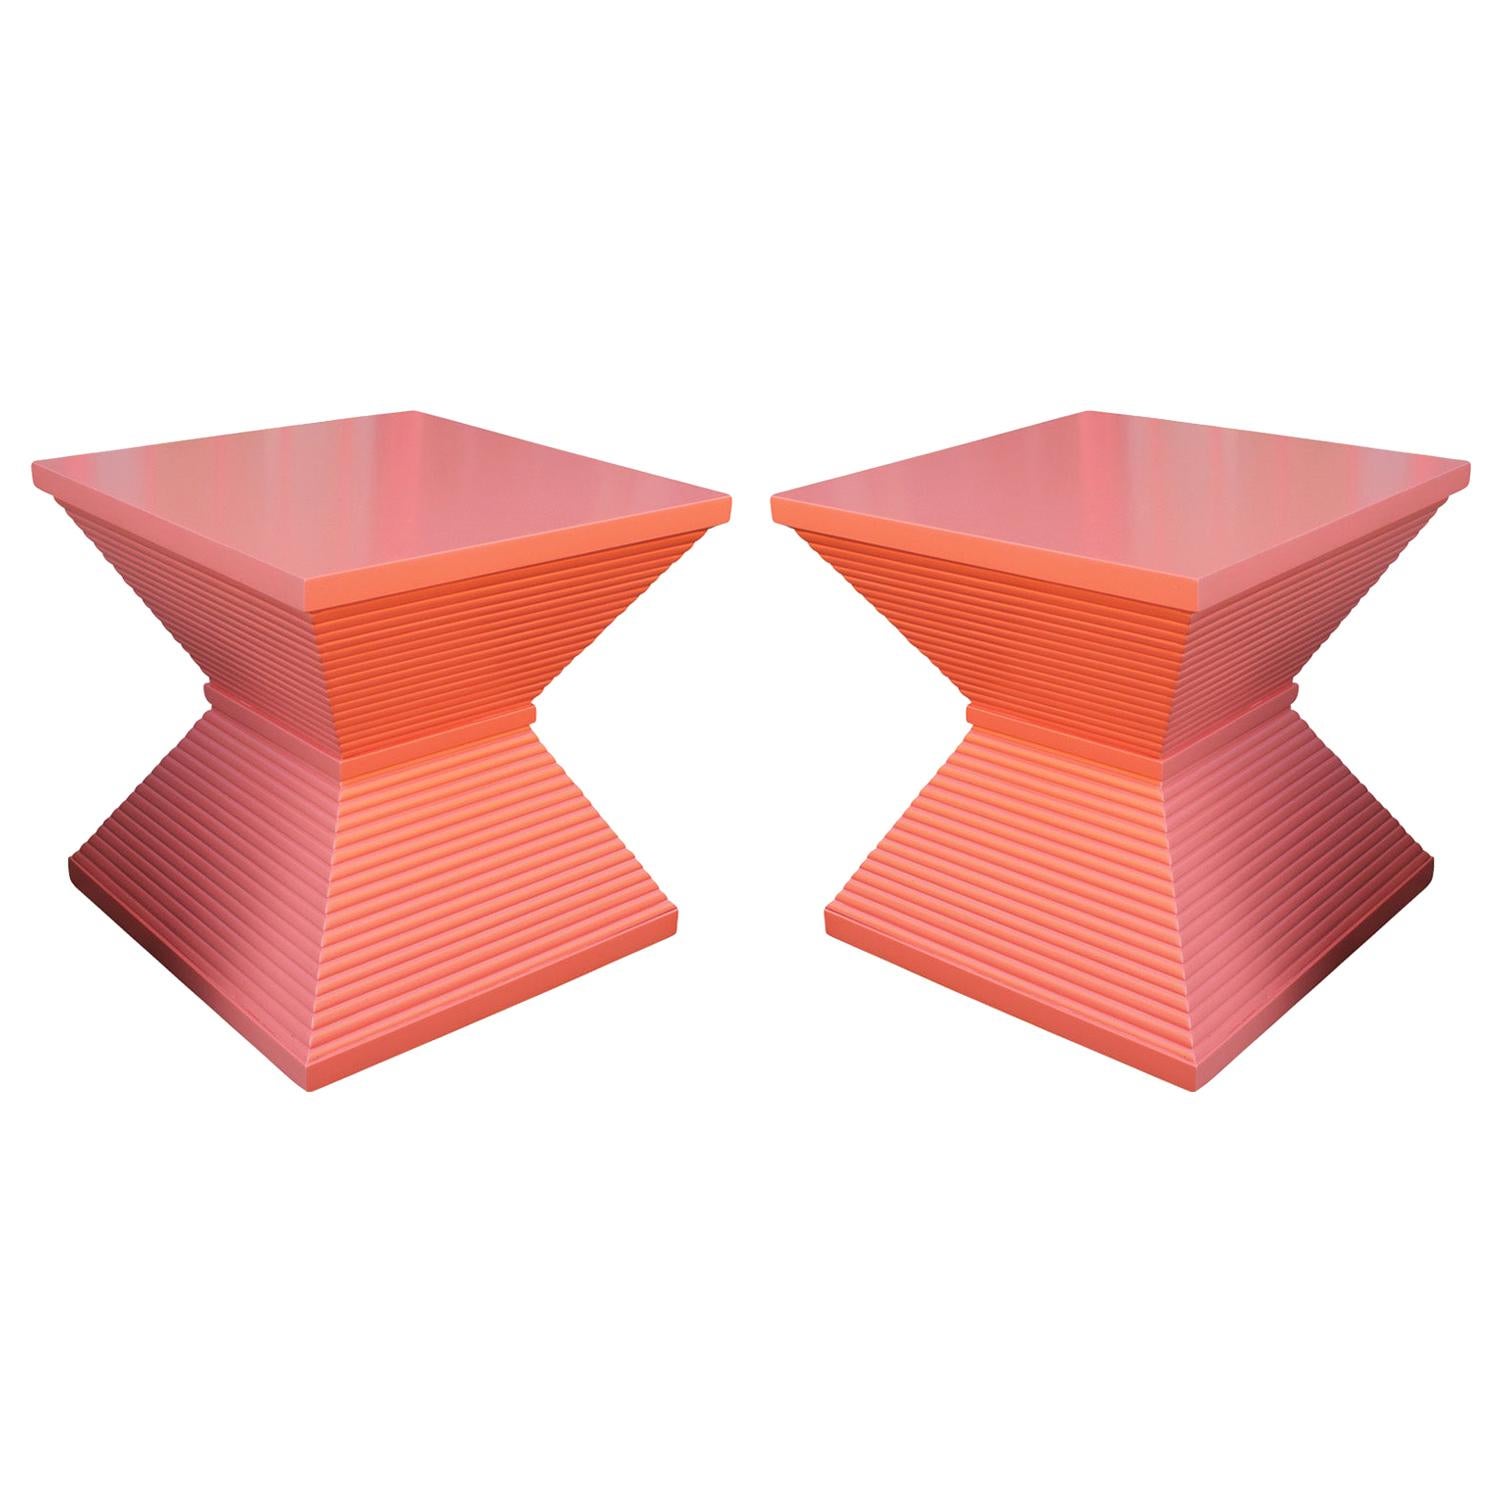 Modern Sculptural Pair of Coral Lacquered Pyramid Side Tables